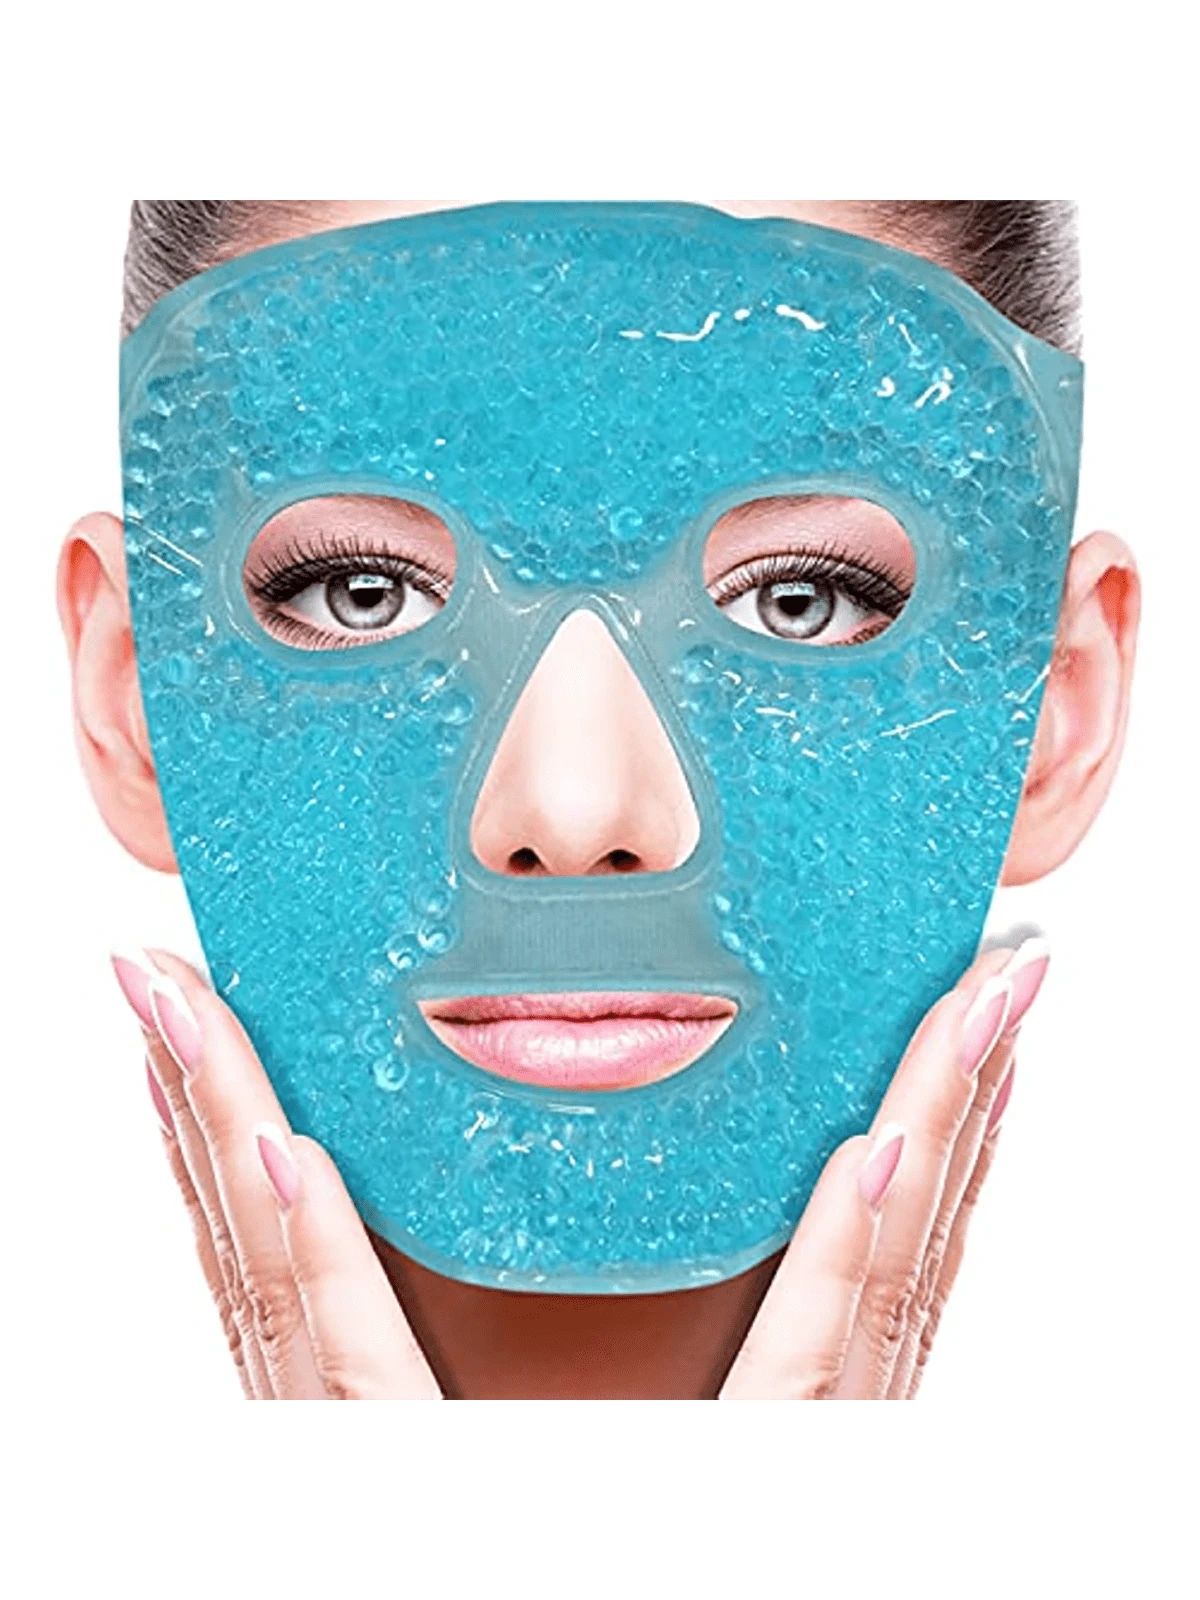 Gel Face Mask For Hot/cold Therapy With Eye Mask & Ice Bag Set For Sleeping | SHEIN